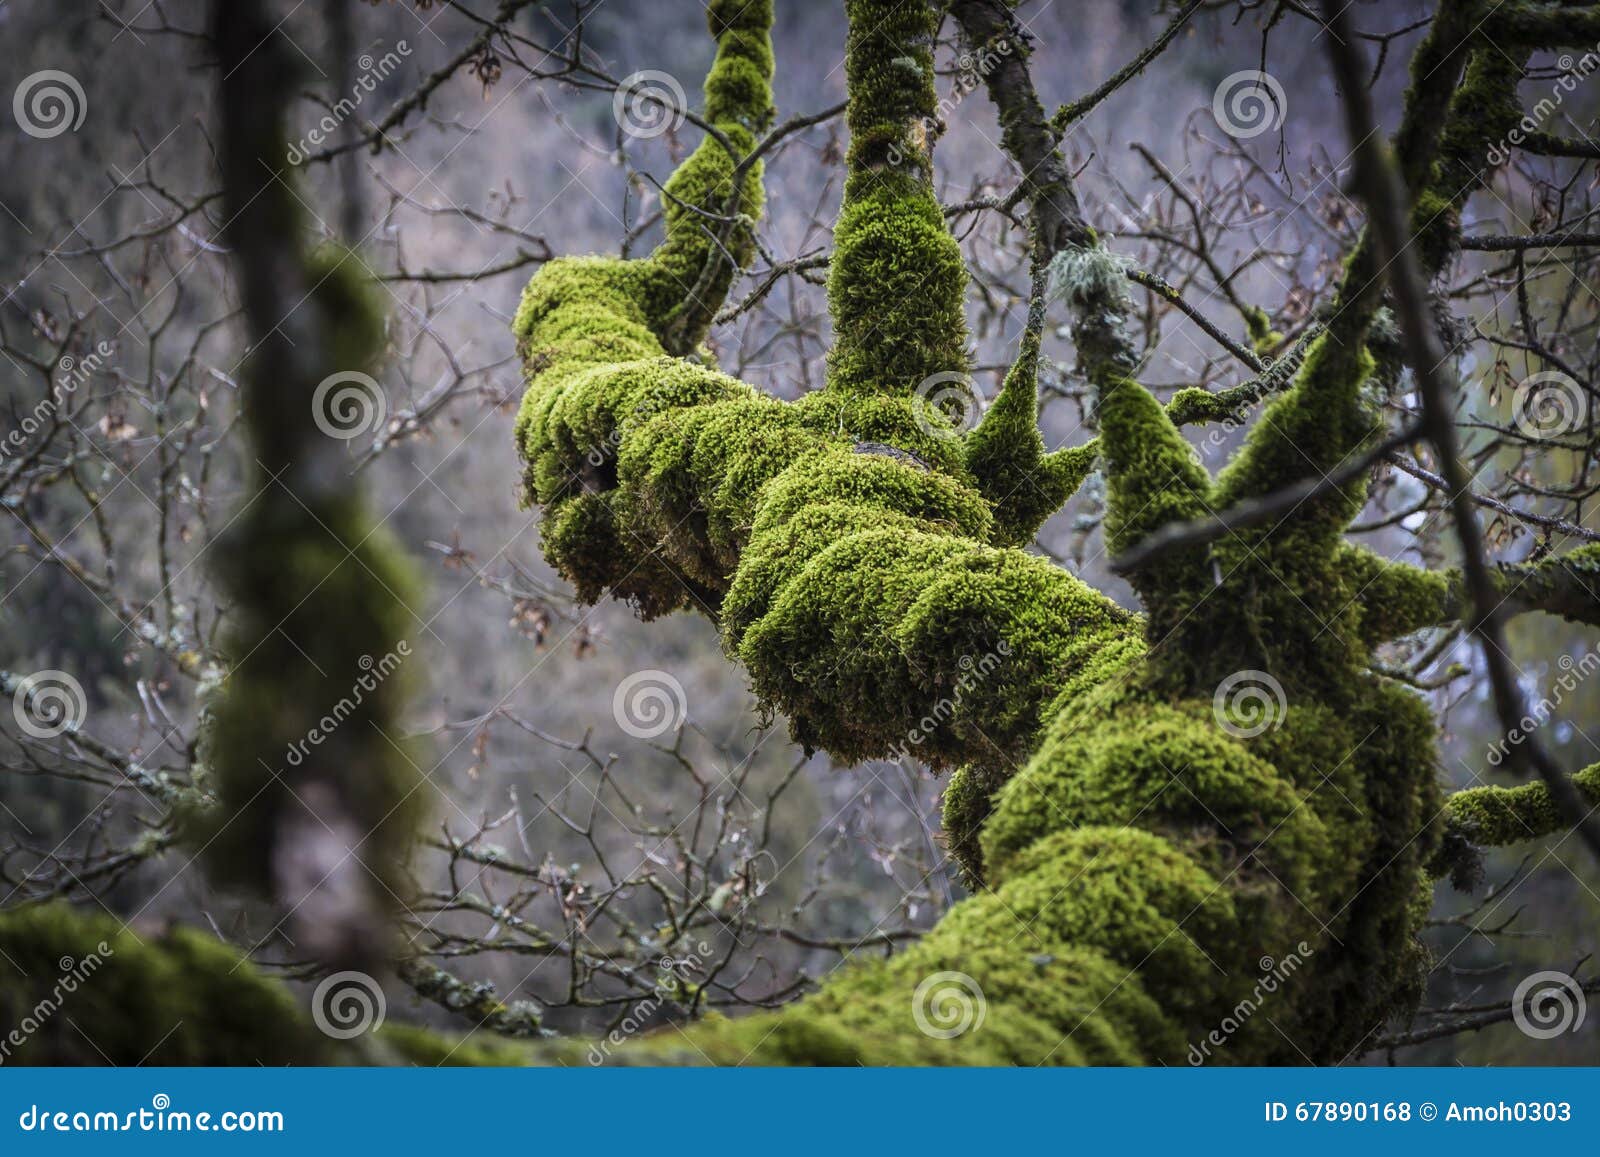 thick moss on tree branch